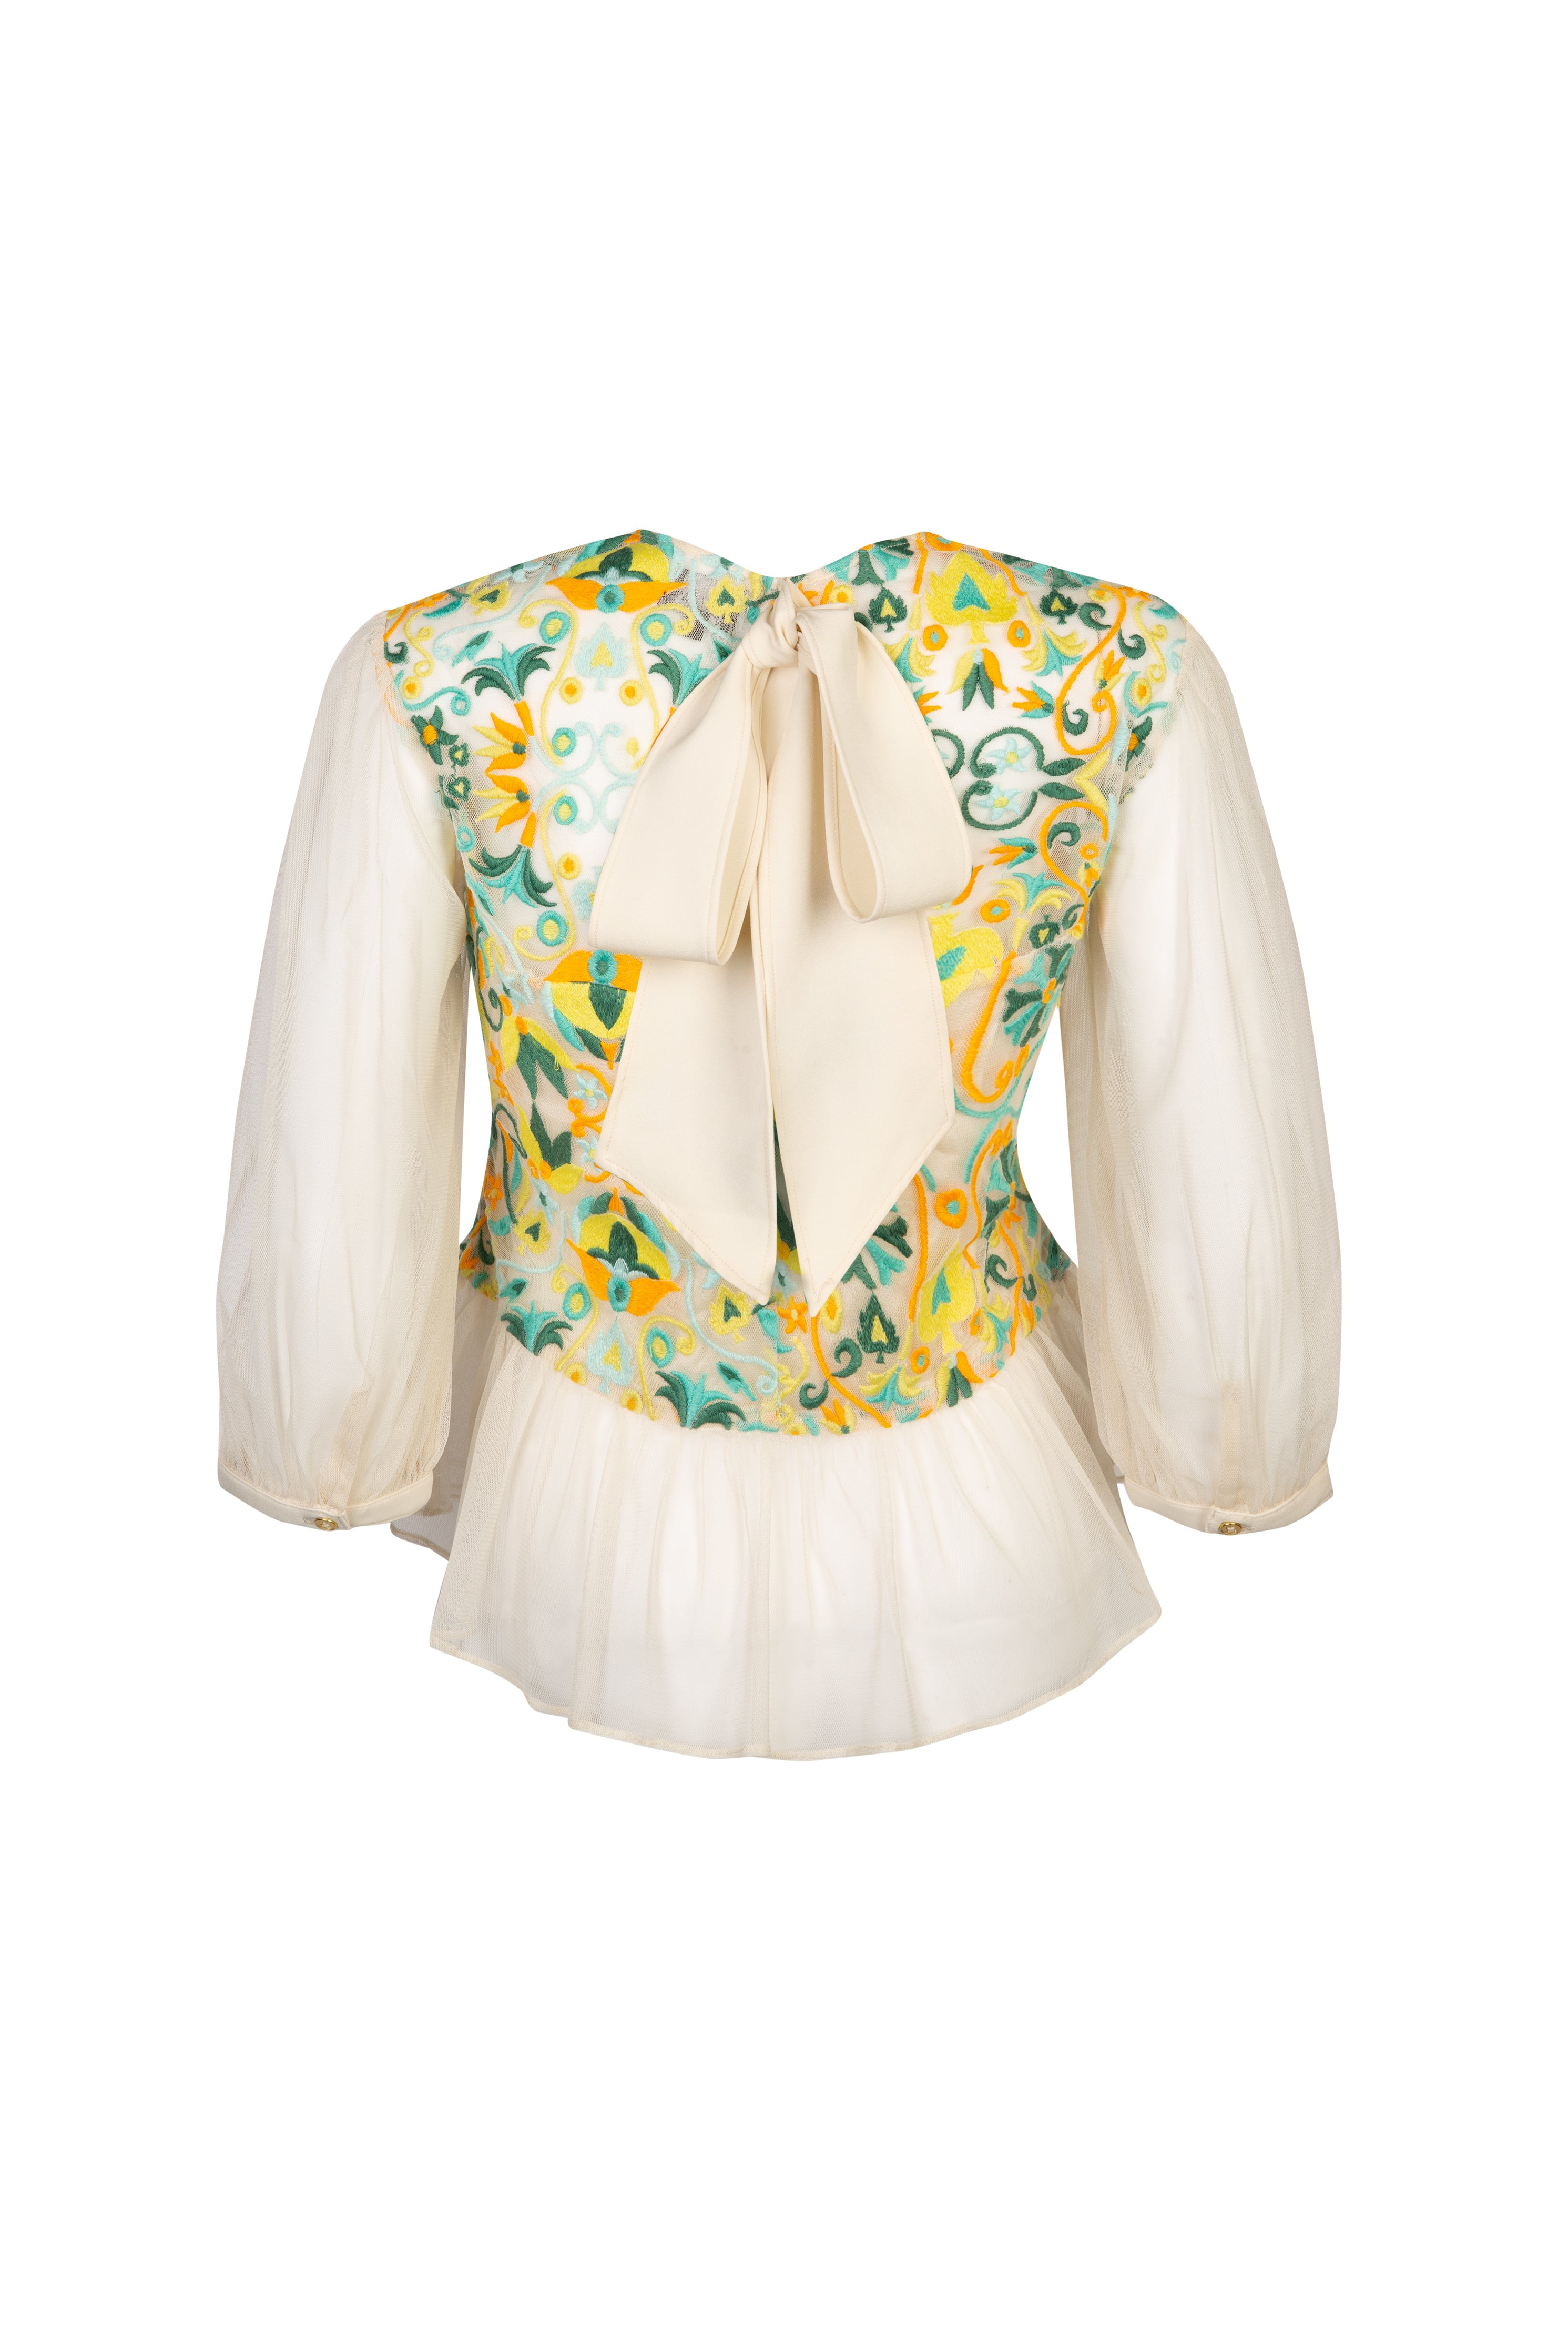 Back view of bright and colourful embroidered top with bow detail